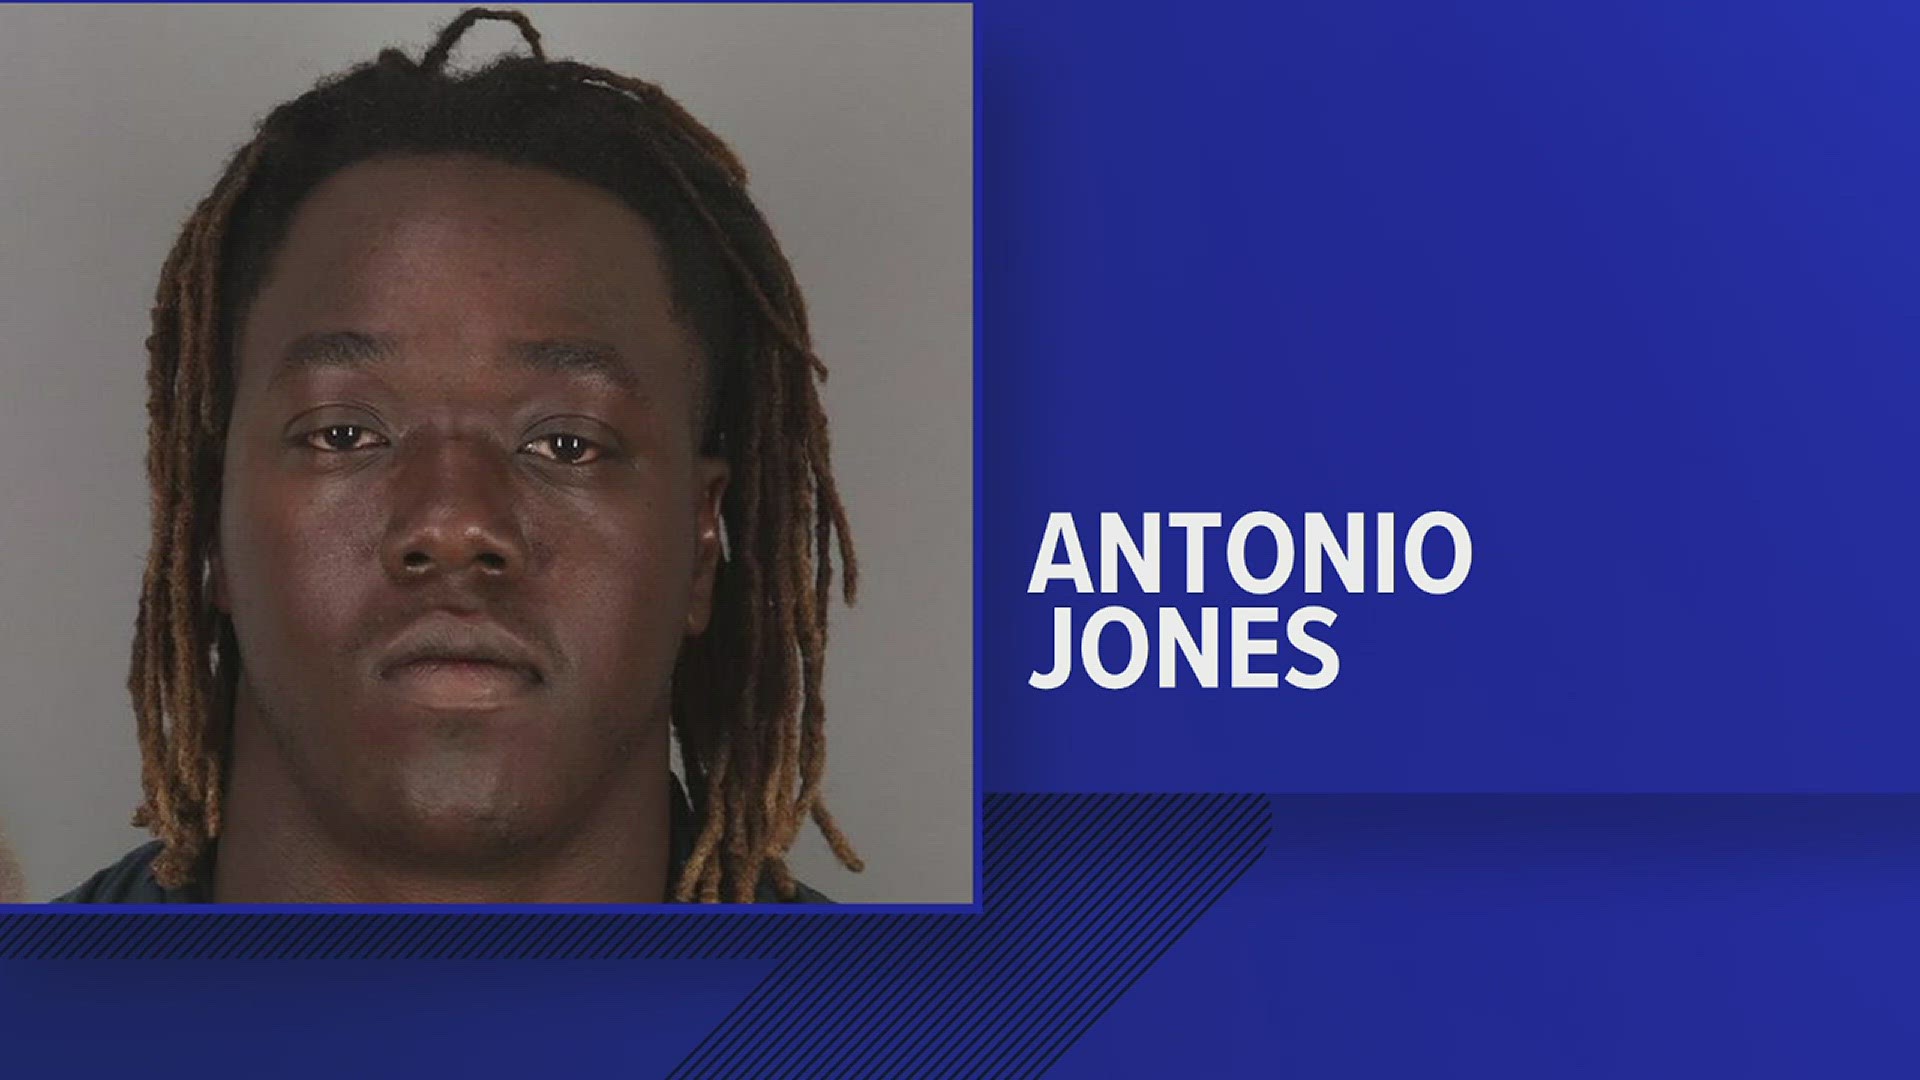 Antonio Monte Jones pleaded guilty late Wednesday to while the jury was deliberating.